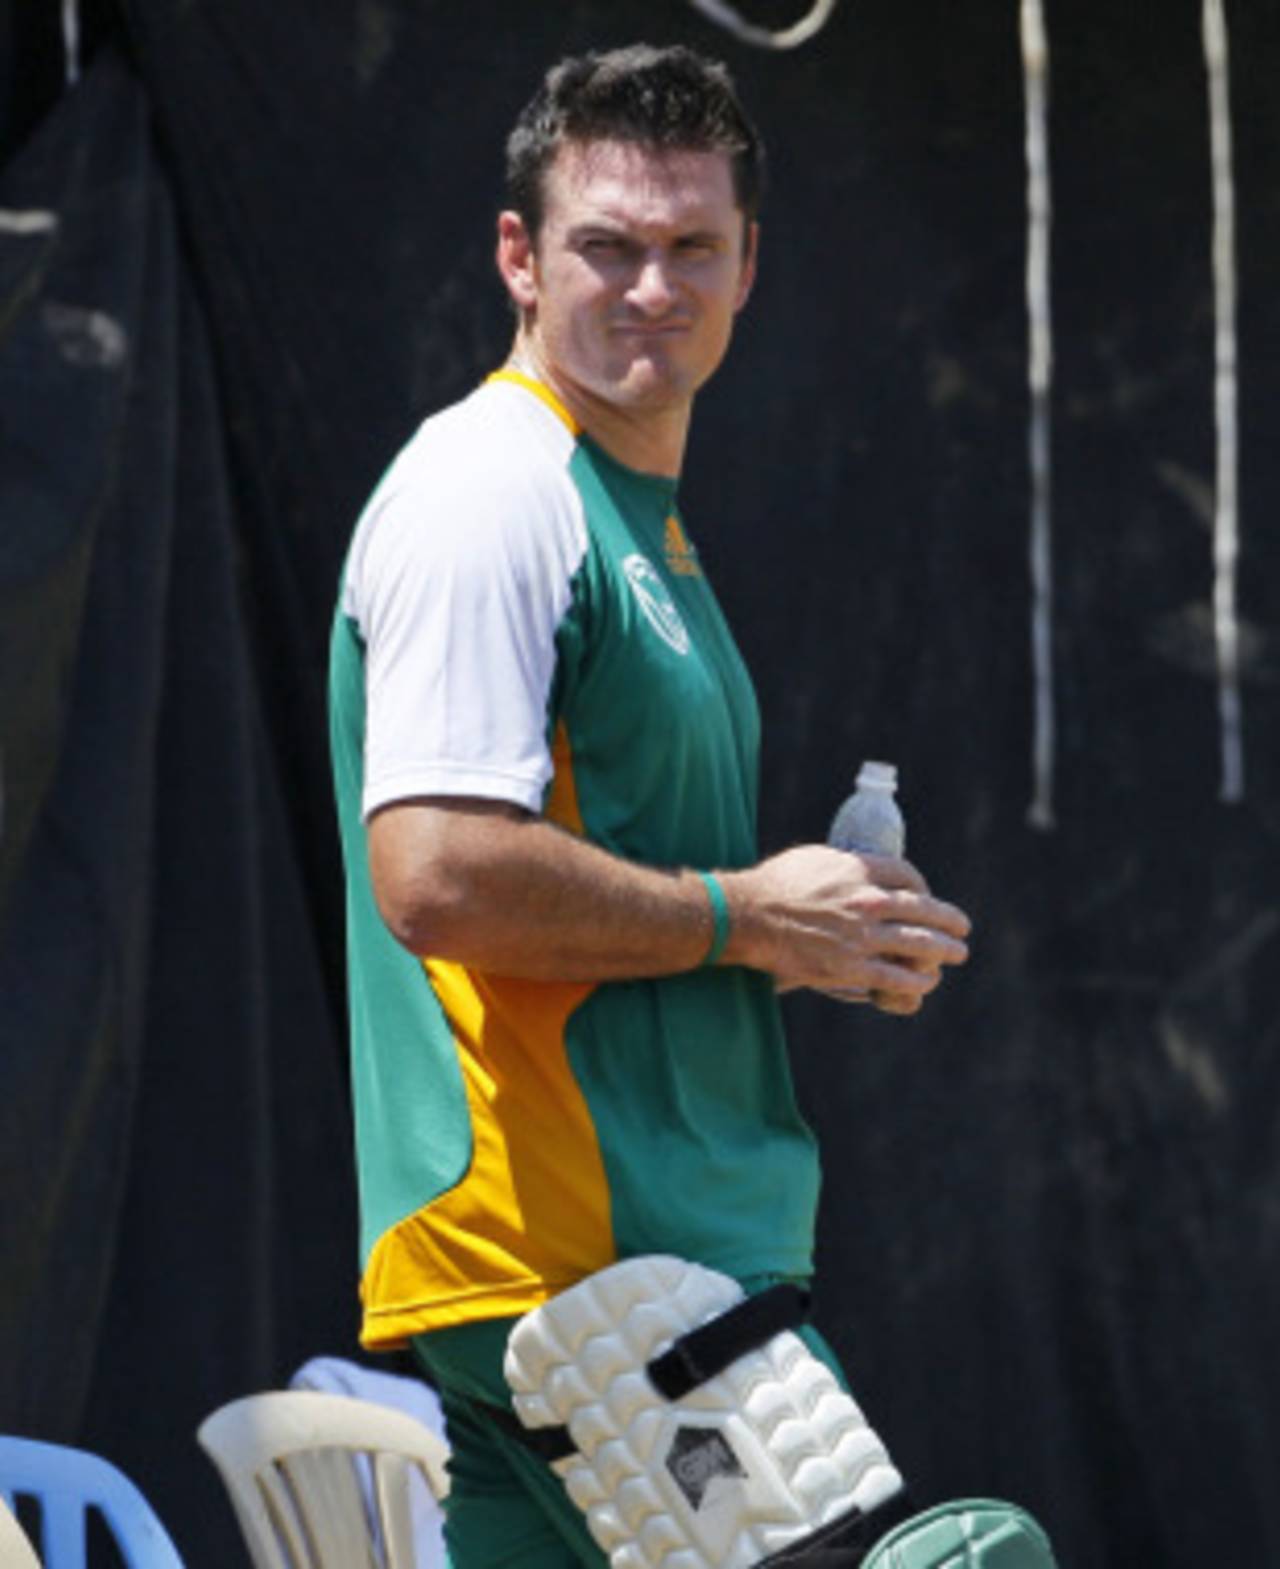 Graeme Smith has flown to Ireland to get engaged, instead of returning to South Africa to face the music&nbsp;&nbsp;&bull;&nbsp;&nbsp;Associated Press